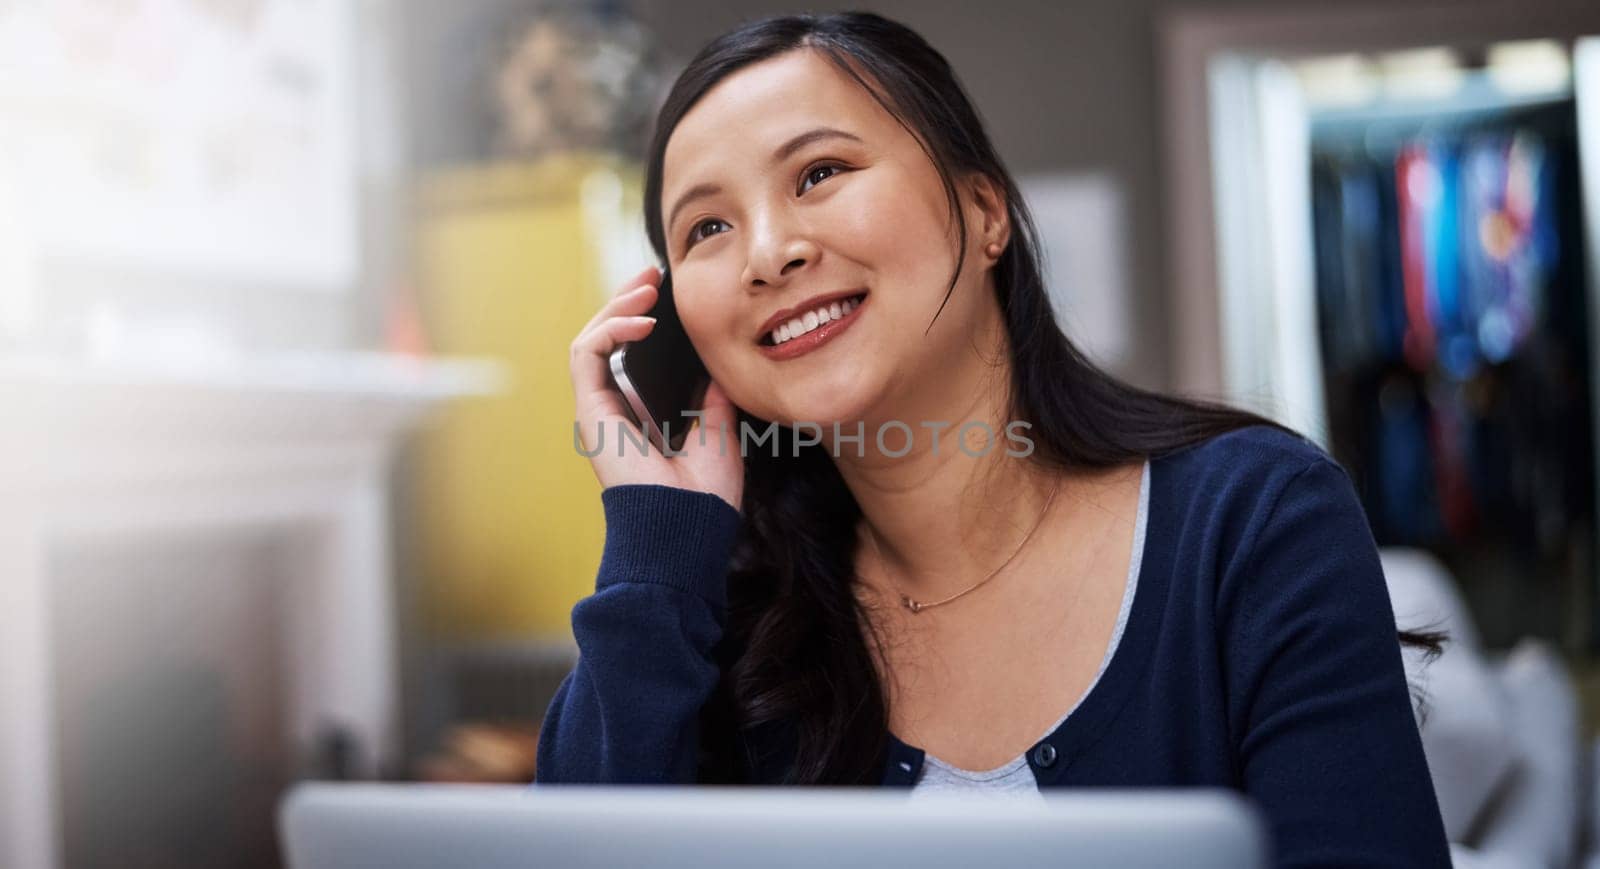 Shes always reachable at the home office. an attractive young female entrepreneur making a call while working from home